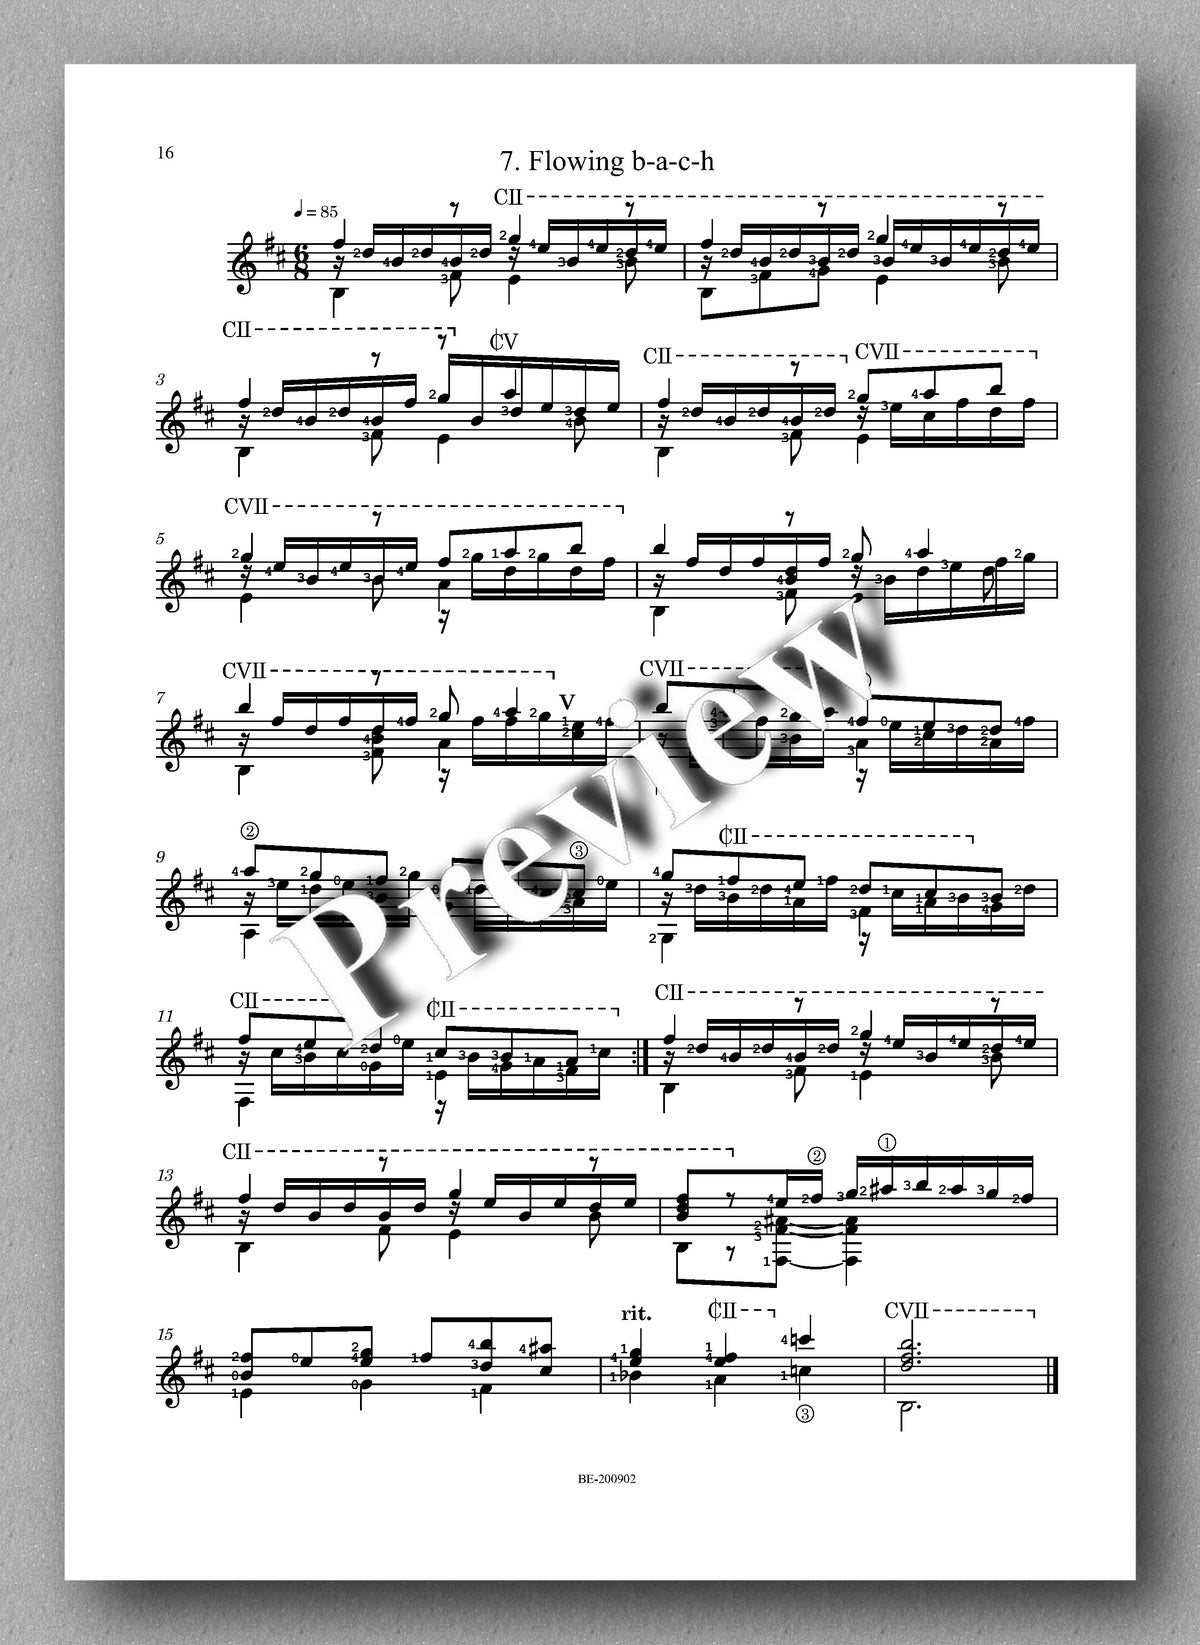 Rasmussen, Number One - preview of the music score 4